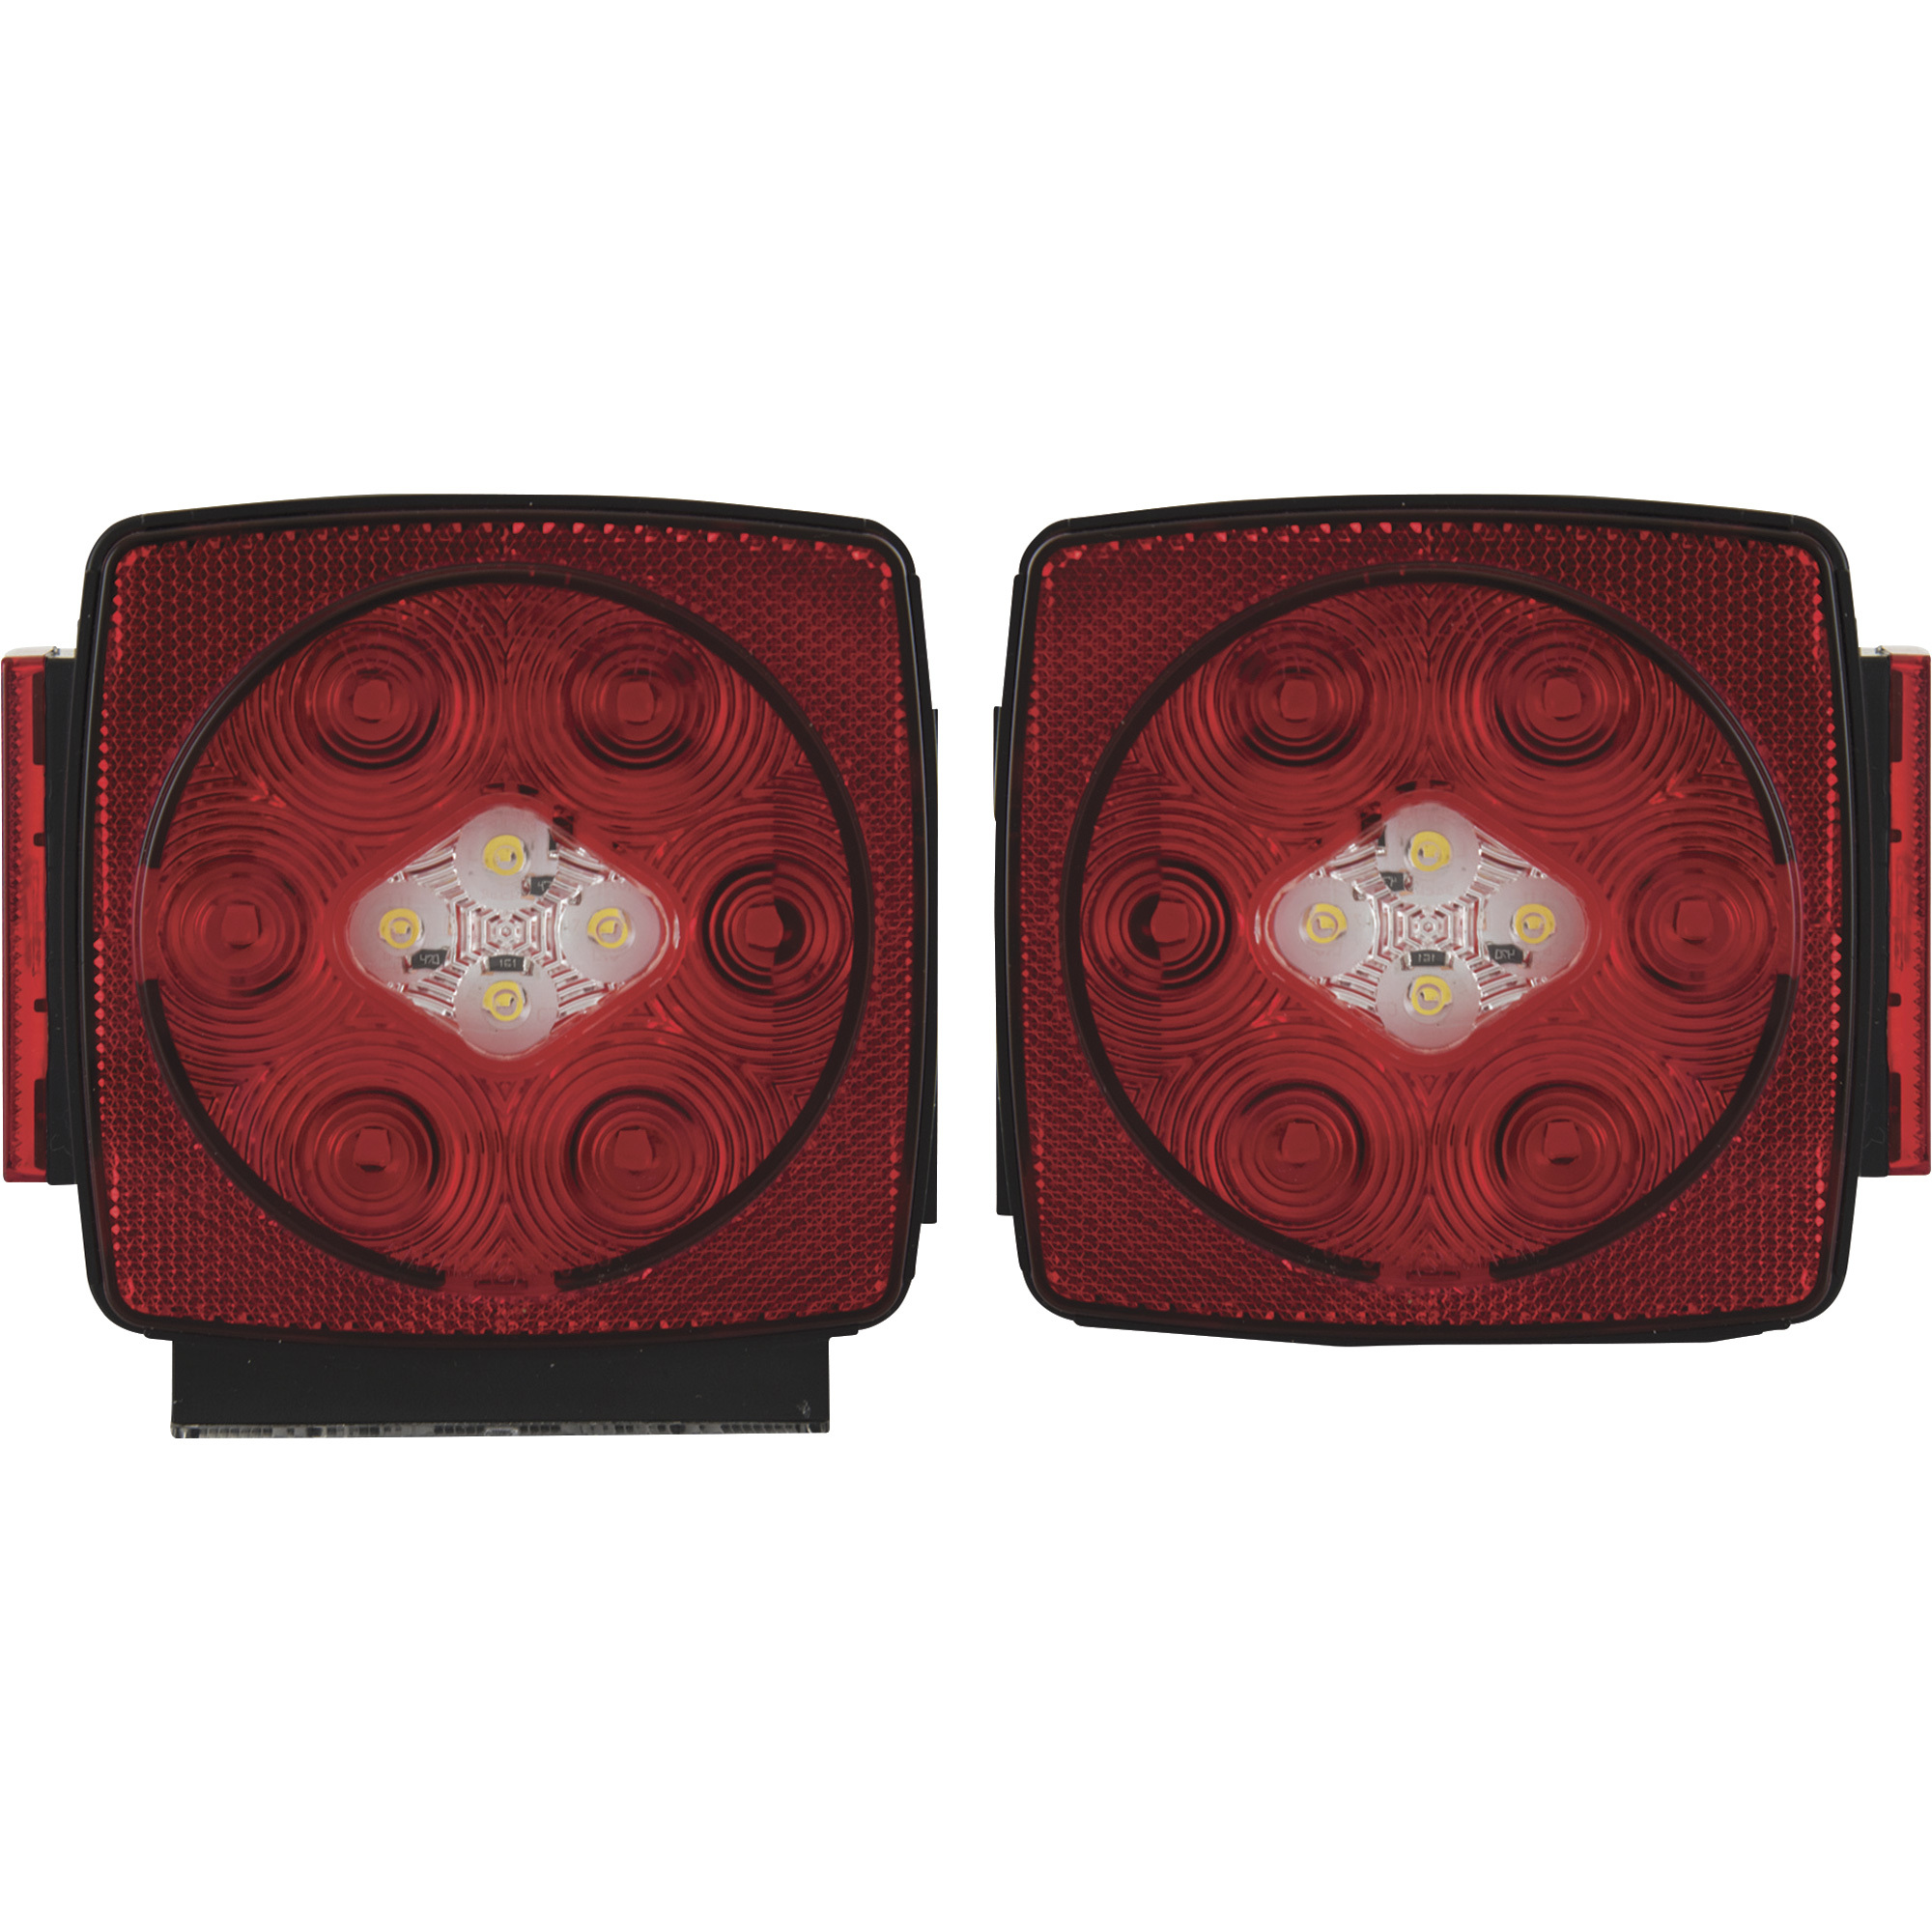 Hopkins Towing Solutions LED Trailer Light Kit with Integrated Back-Up Light â Red, Model C7425